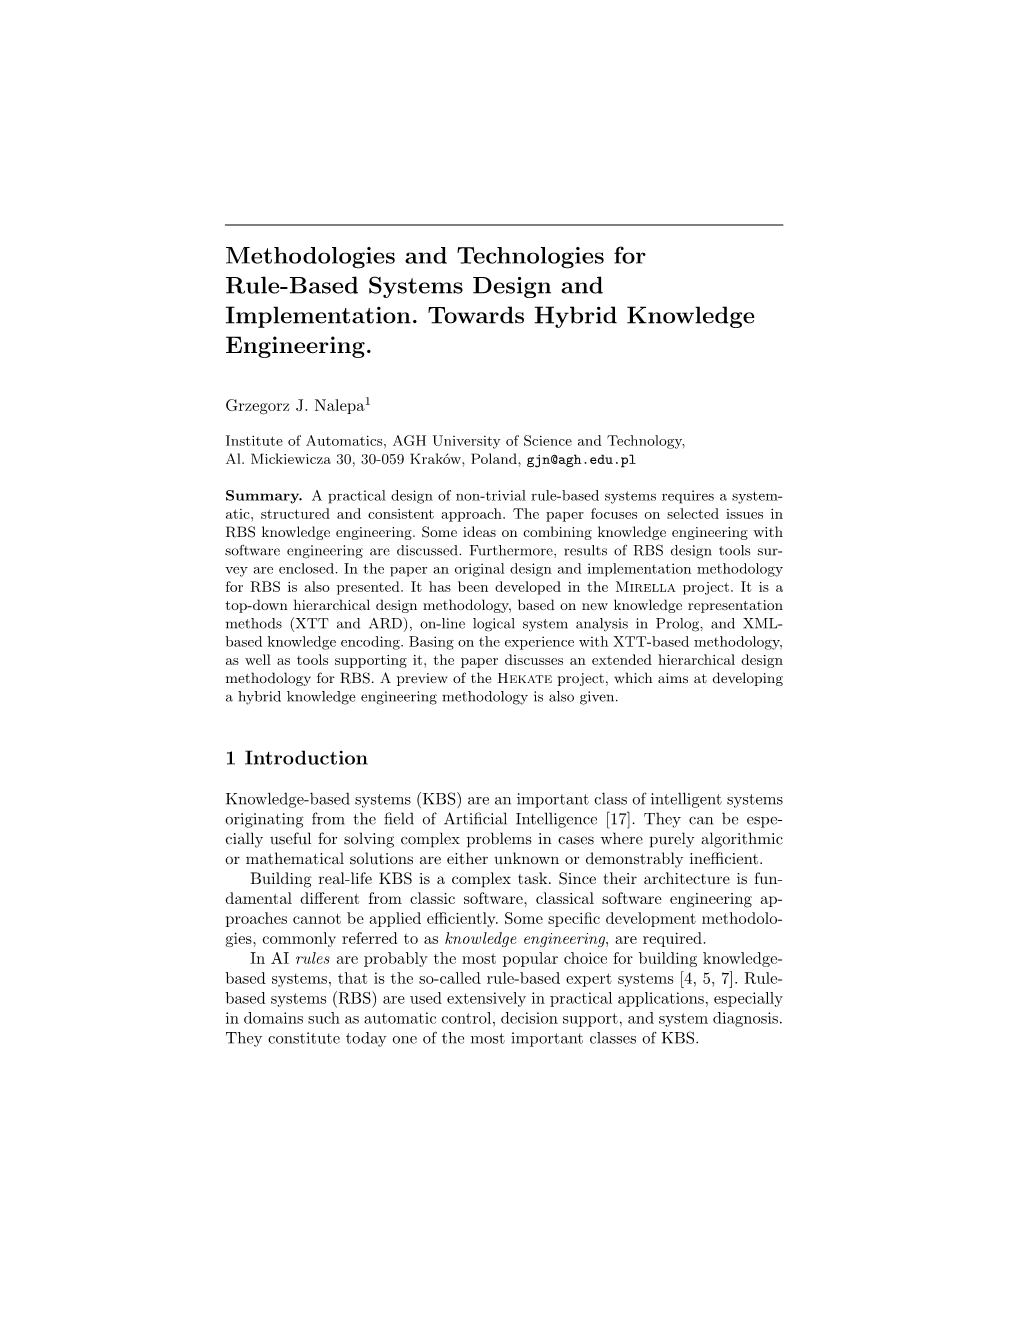 Methodologies and Technologies for Rule-Based Systems Design and Implementation